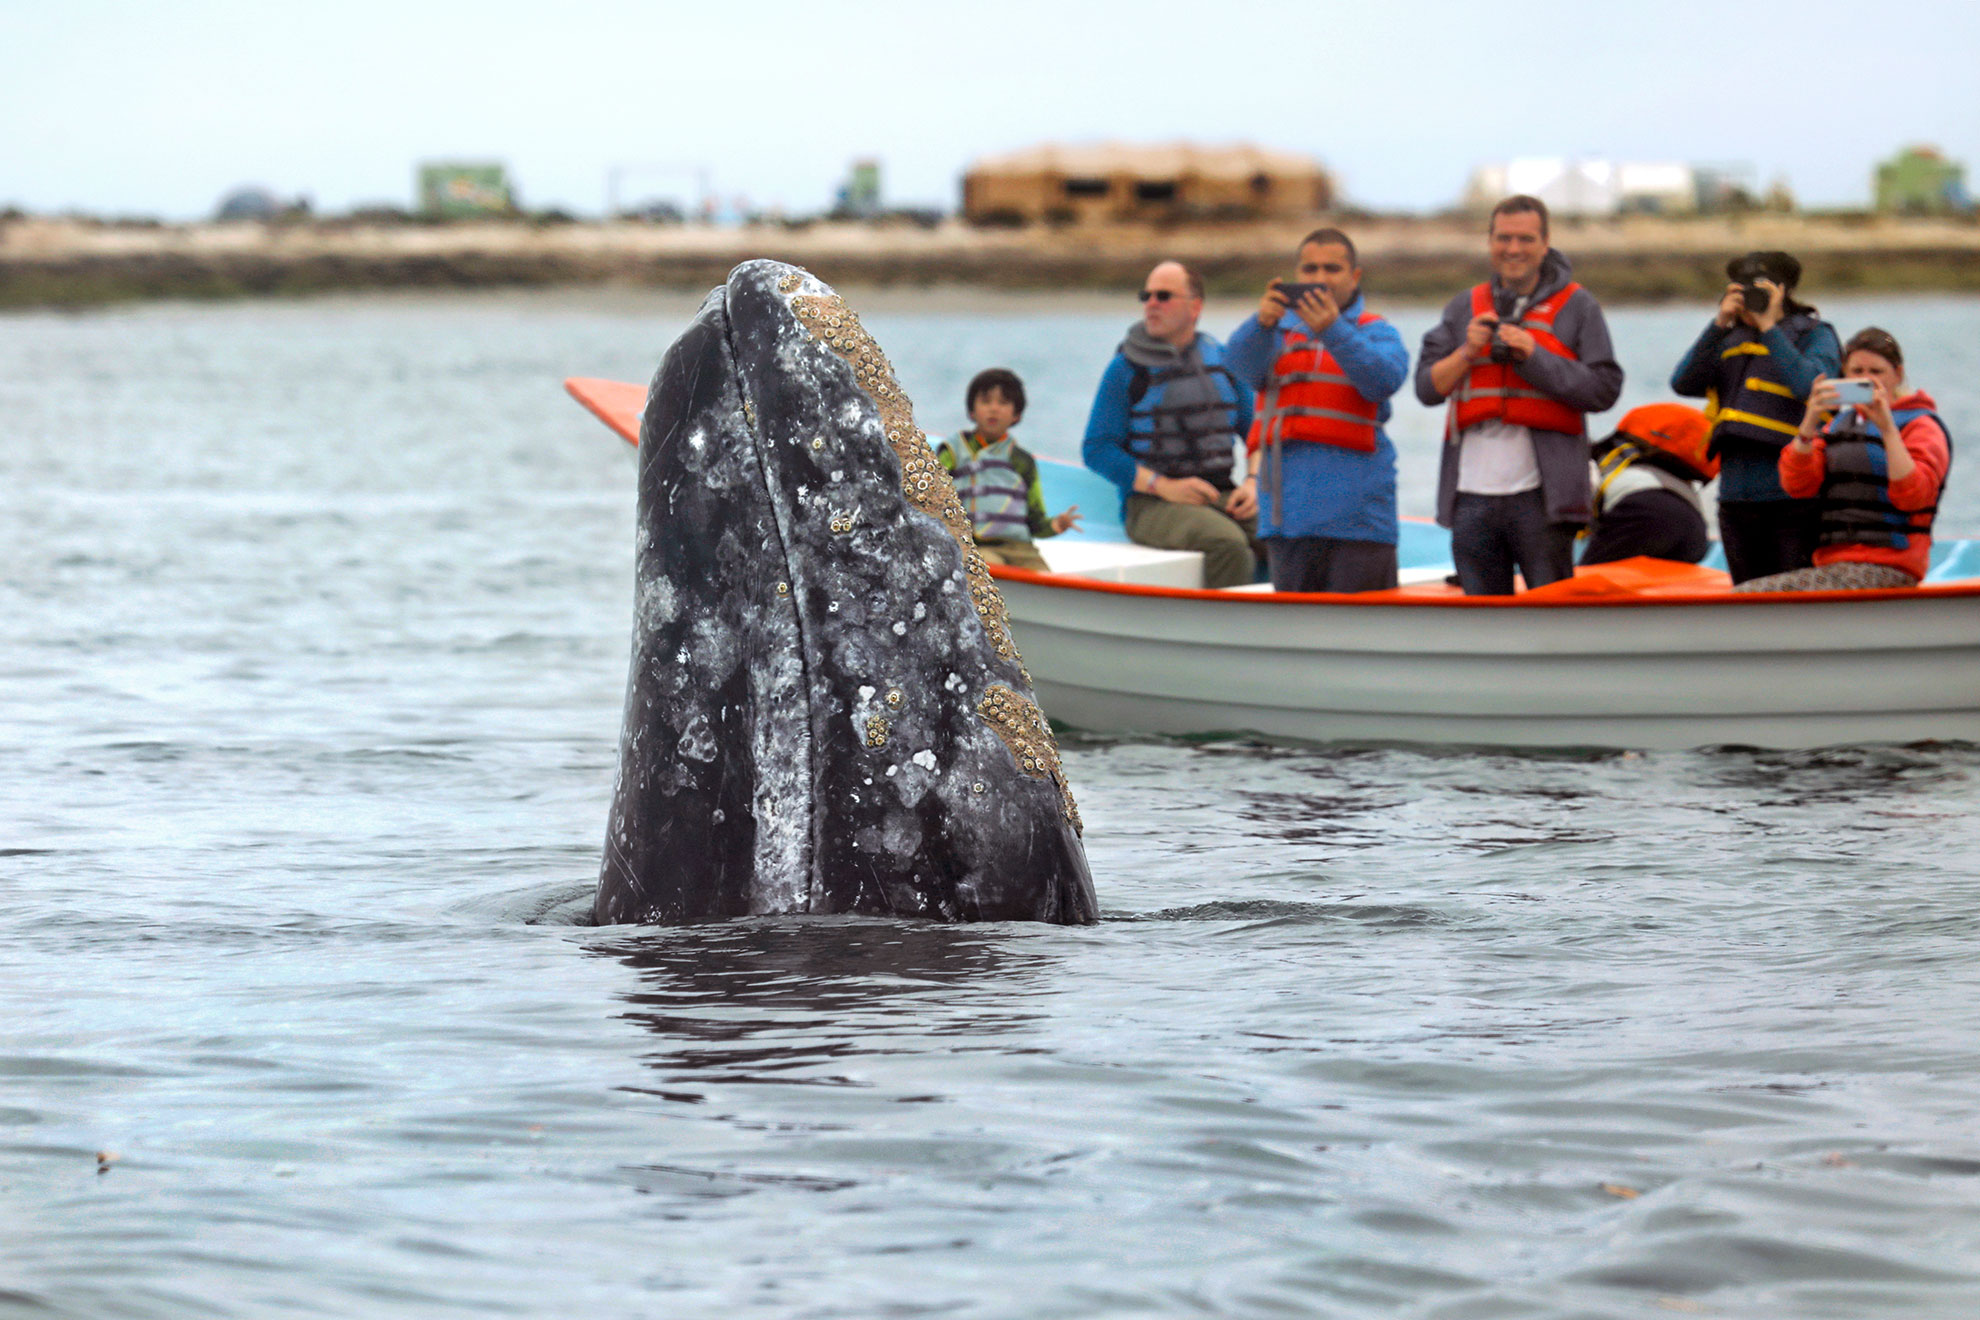 A whale-watching group gets a view of a gray whale “spy hopping” in San Ignacio Lagoon, Baja California, Mexico. The term refers to when a whale sticks its head above the water, possibly to get a view of surrounding objects.